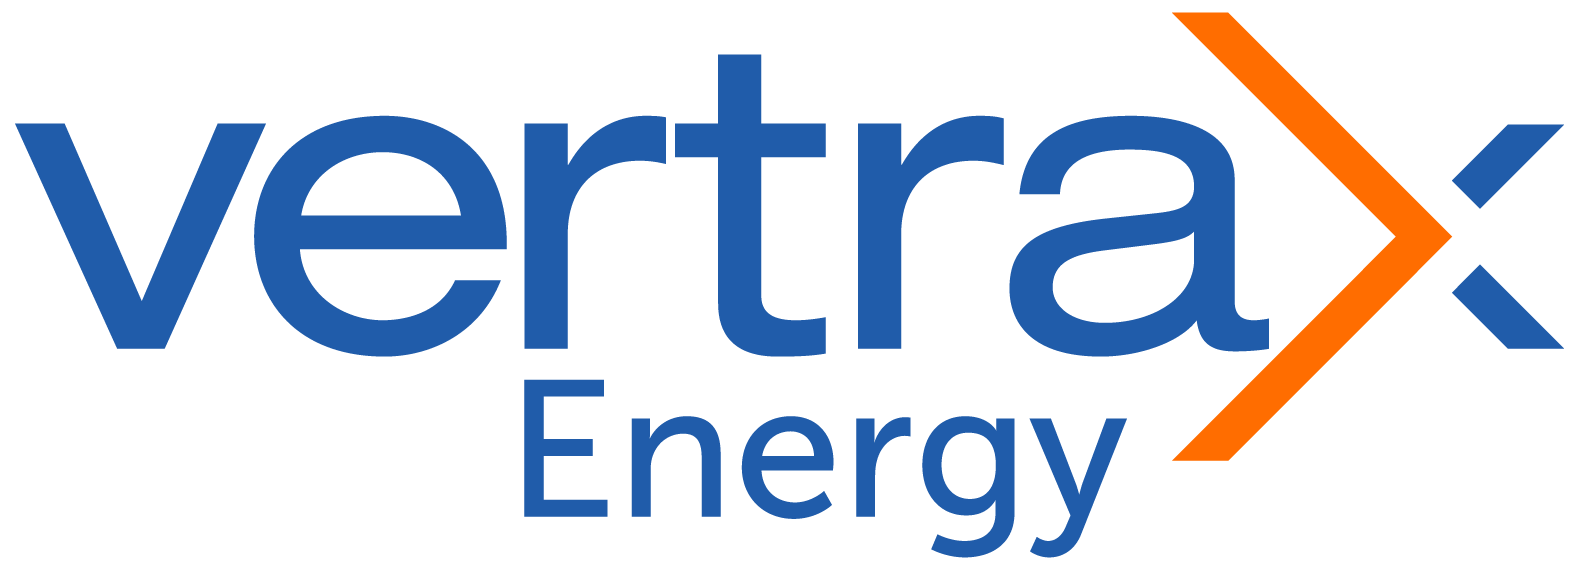 Vertrax Back-Office ERP for Oil & Gas - Vertrax